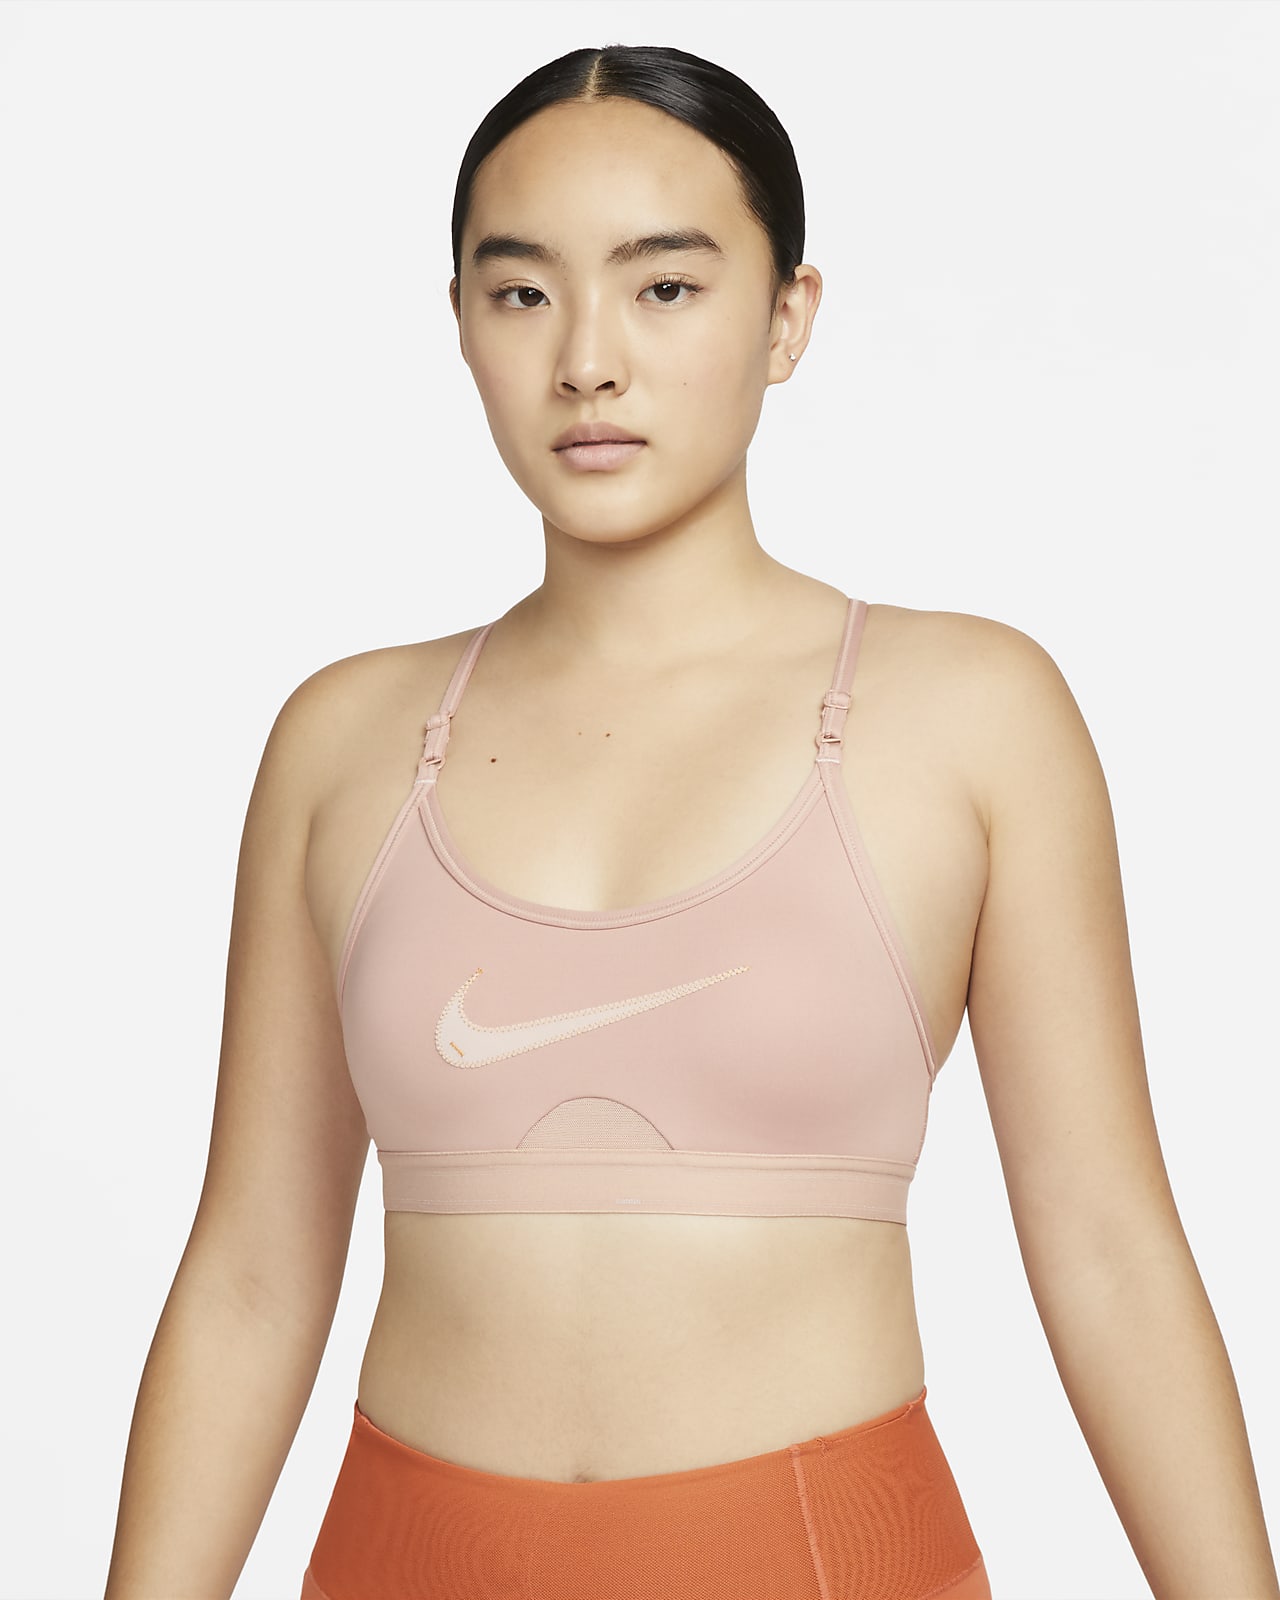 Nike Indy Women's Light-Support Padded Graphic Sports Bra. Nike ID